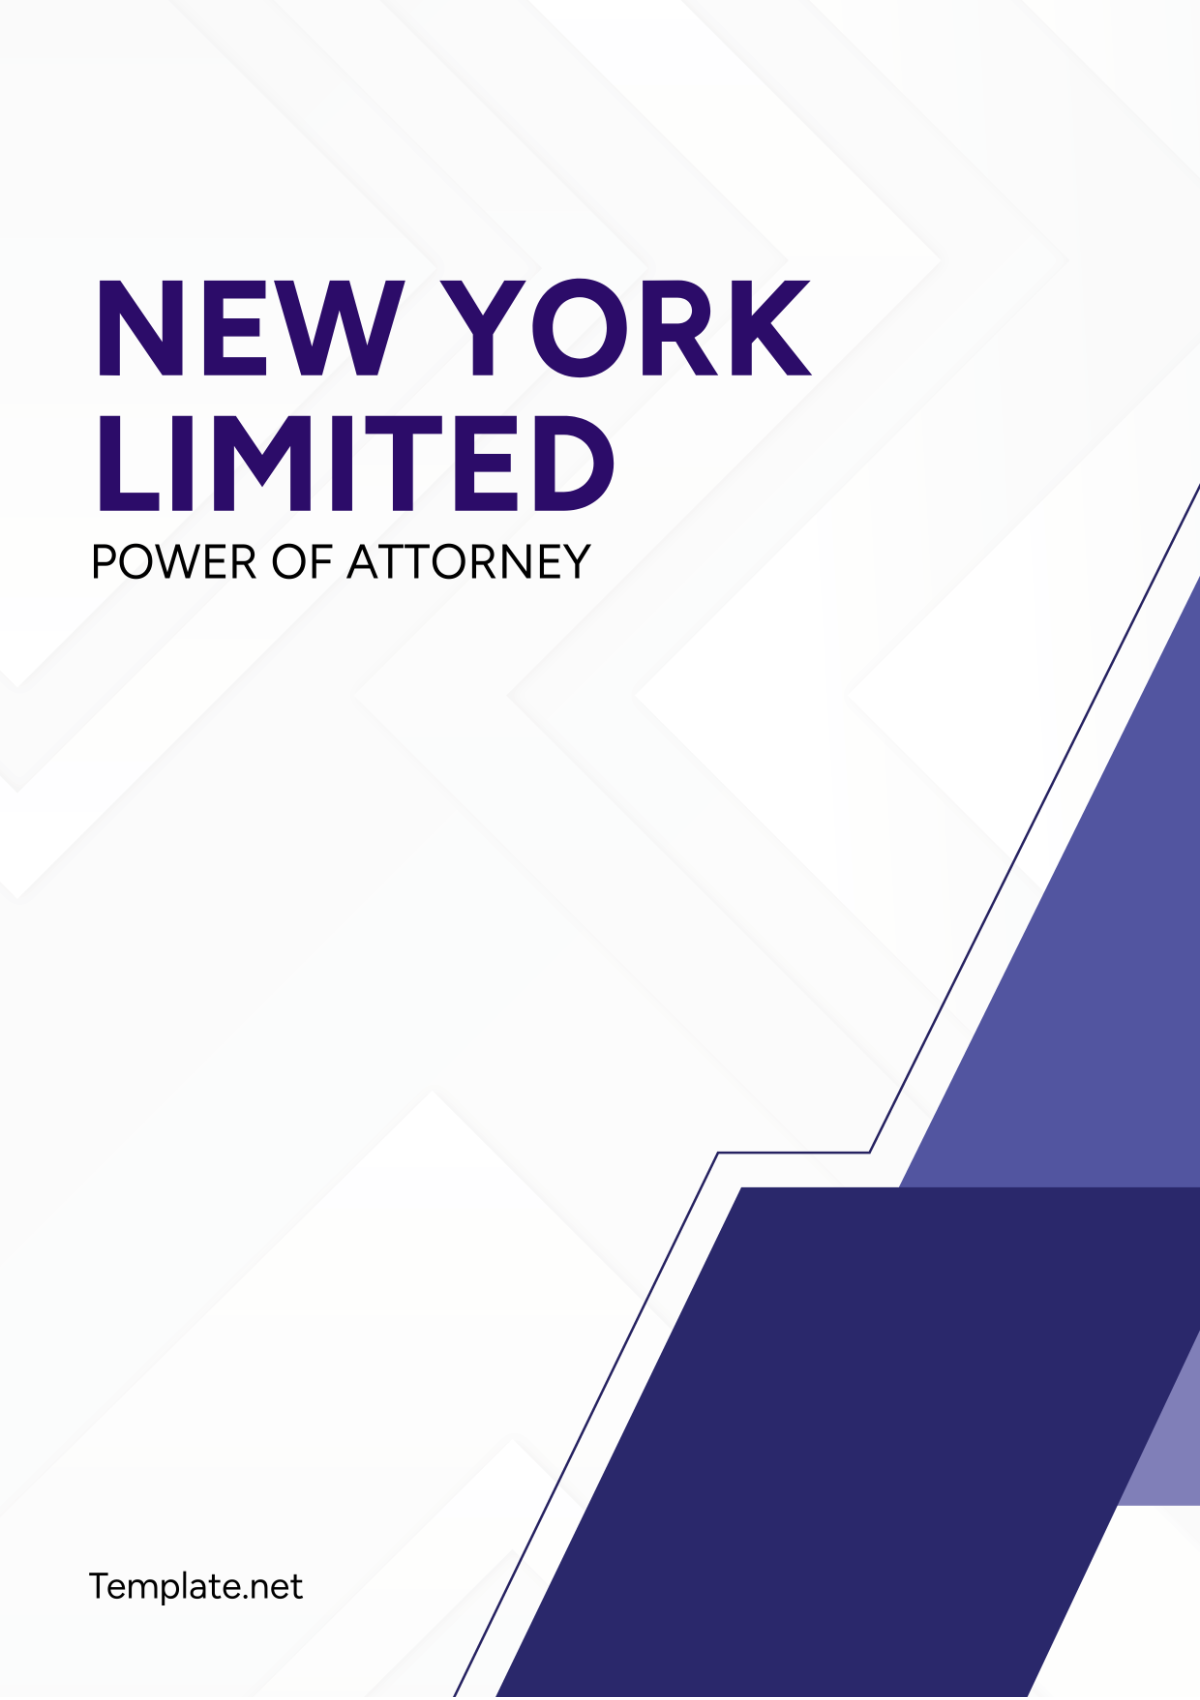 Free New York Limited Power of Attorney Template